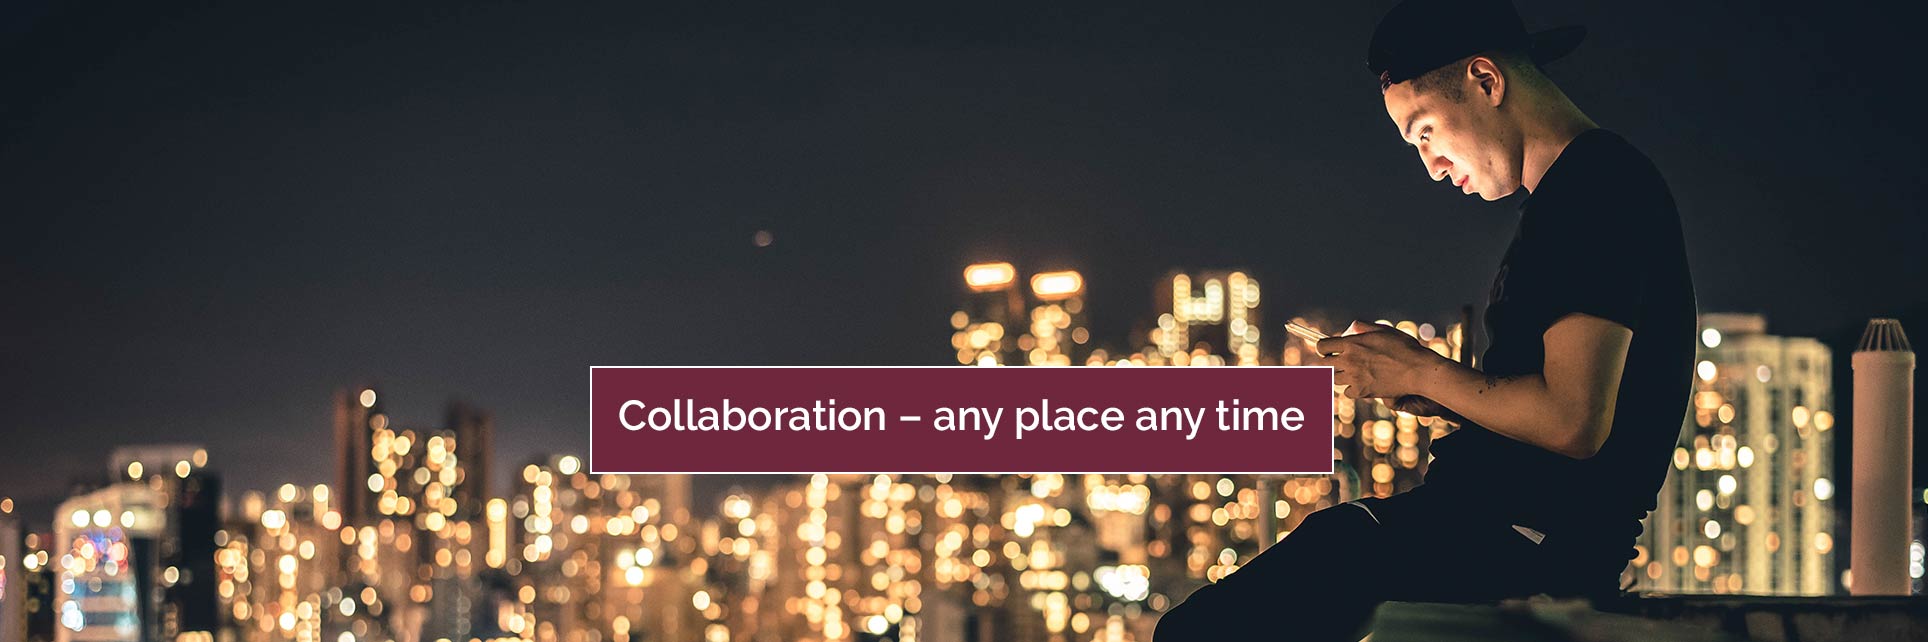 Unified Communications und Collaboration